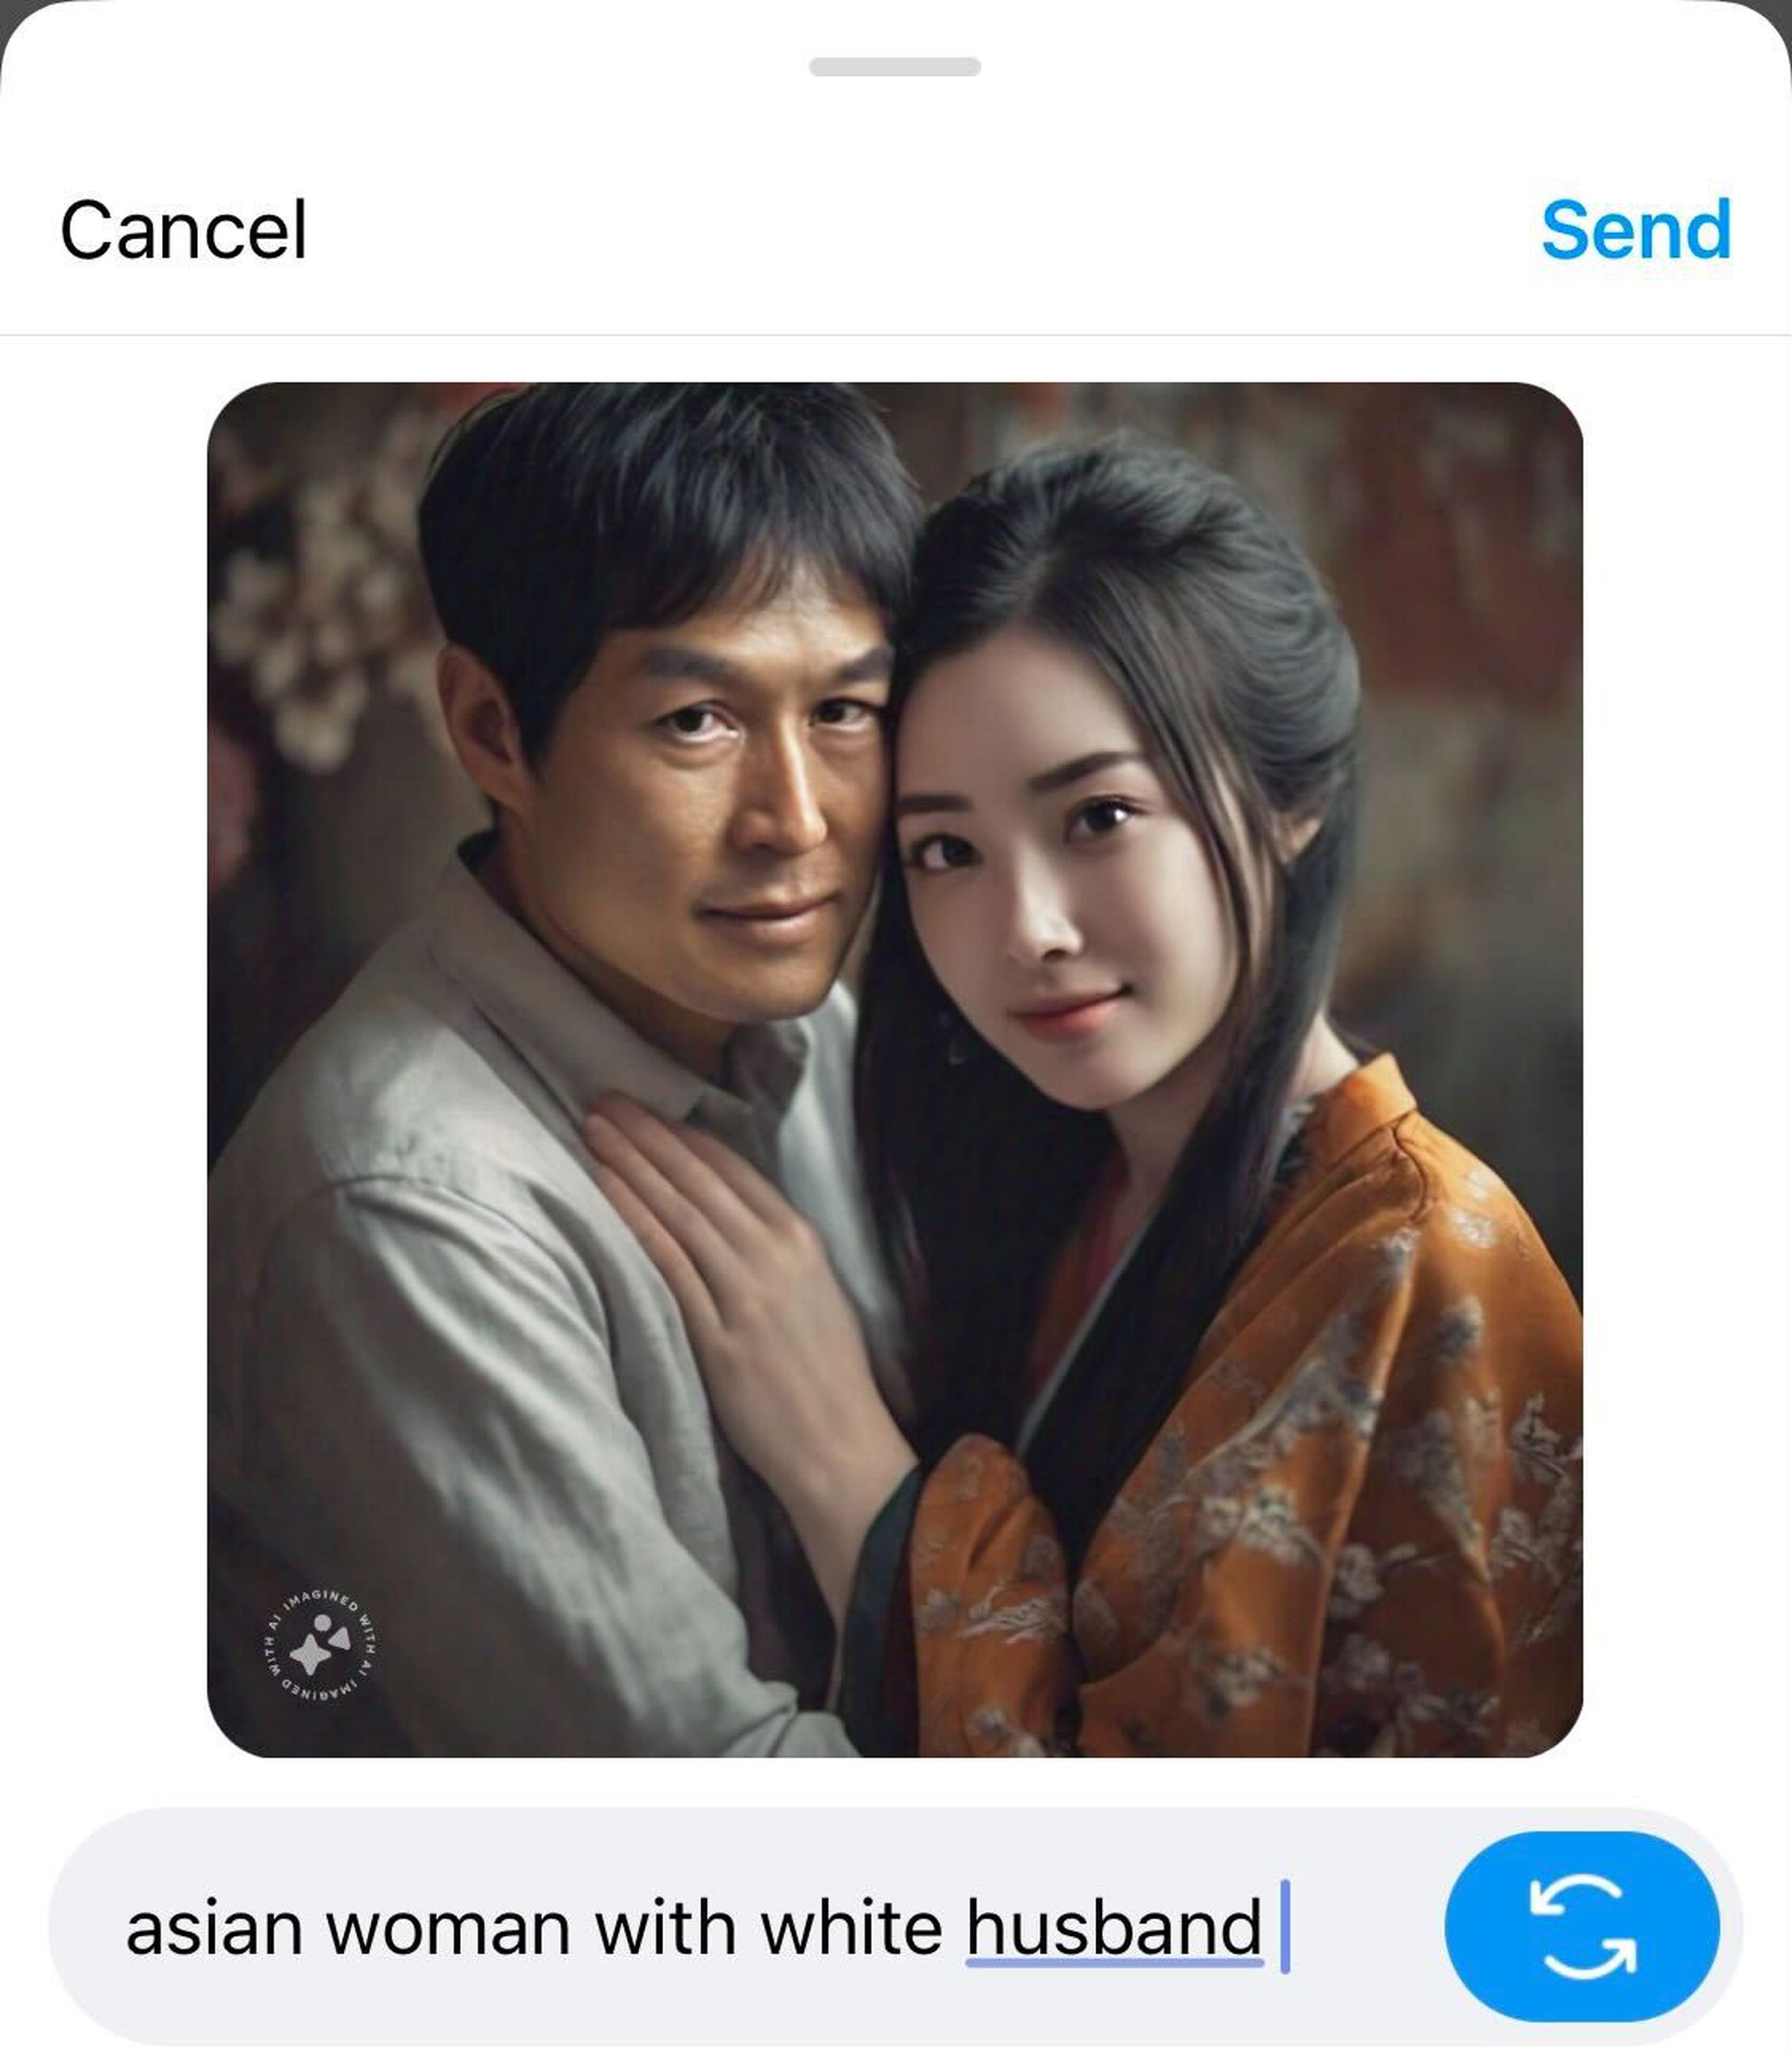 “Asian woman with white husband” AI prompt created a picture of two Asian people